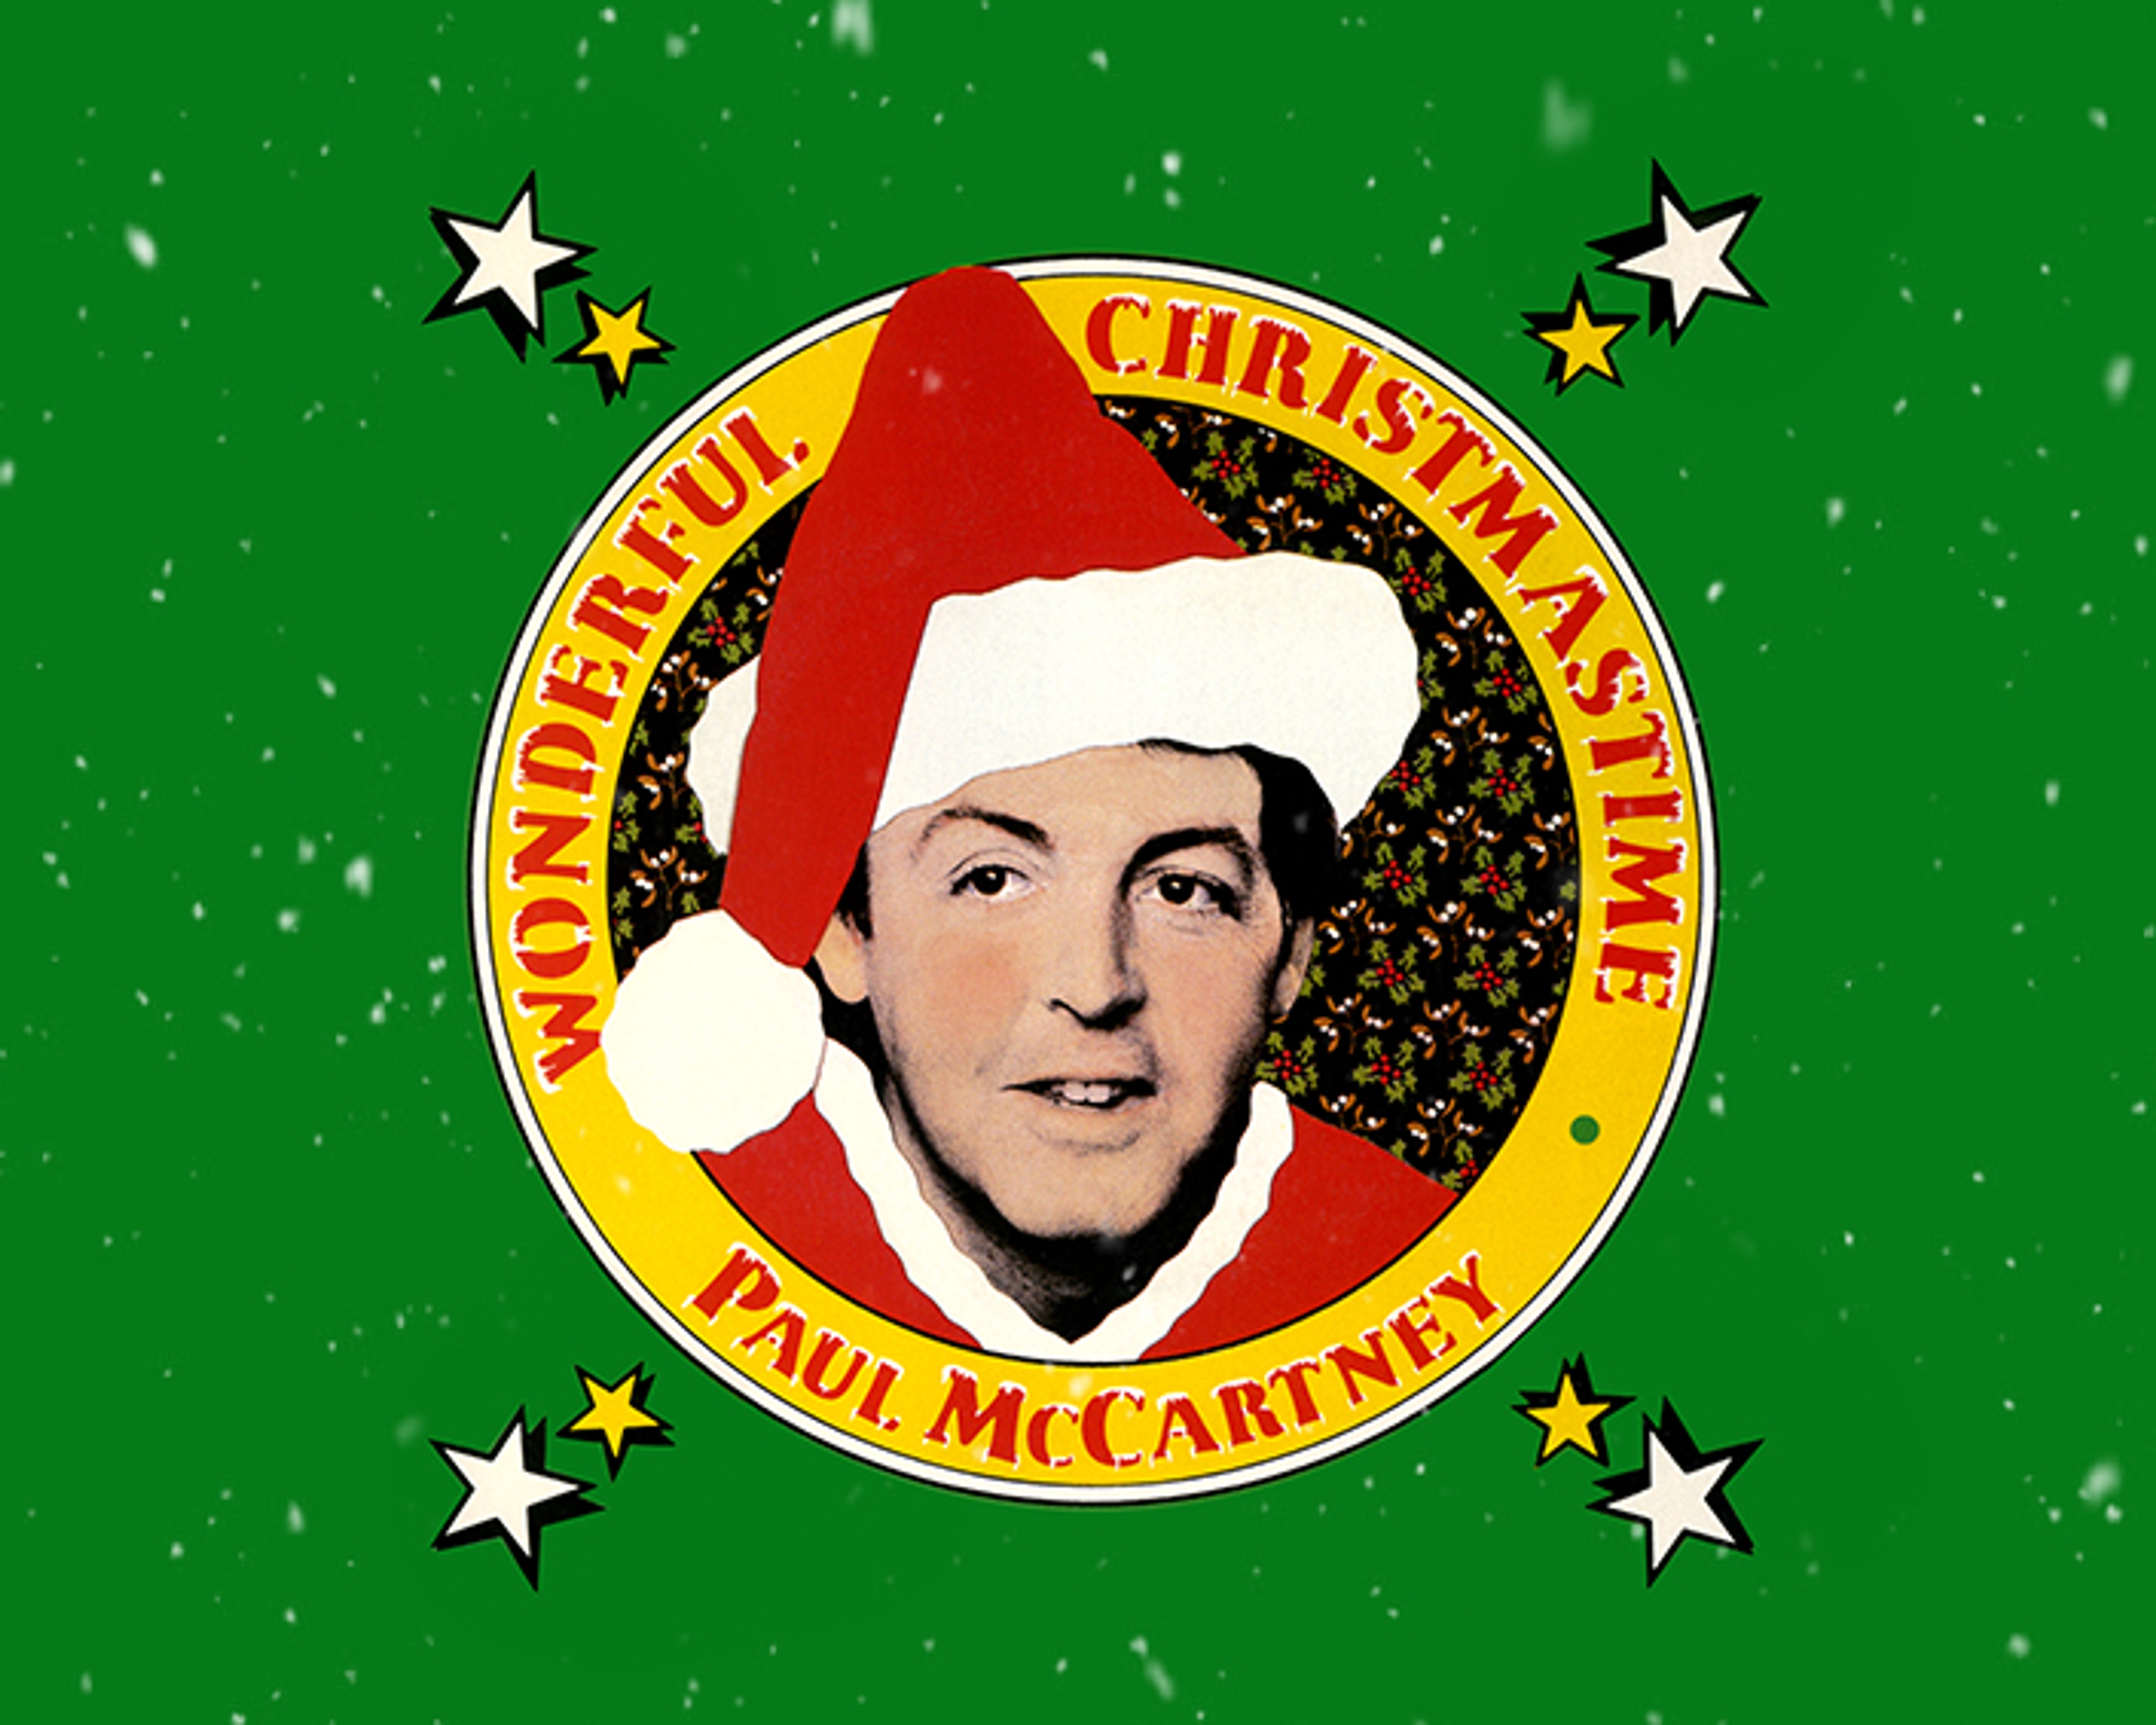 Photo of the cover for Paul's song 'Wonderful Christmastime'